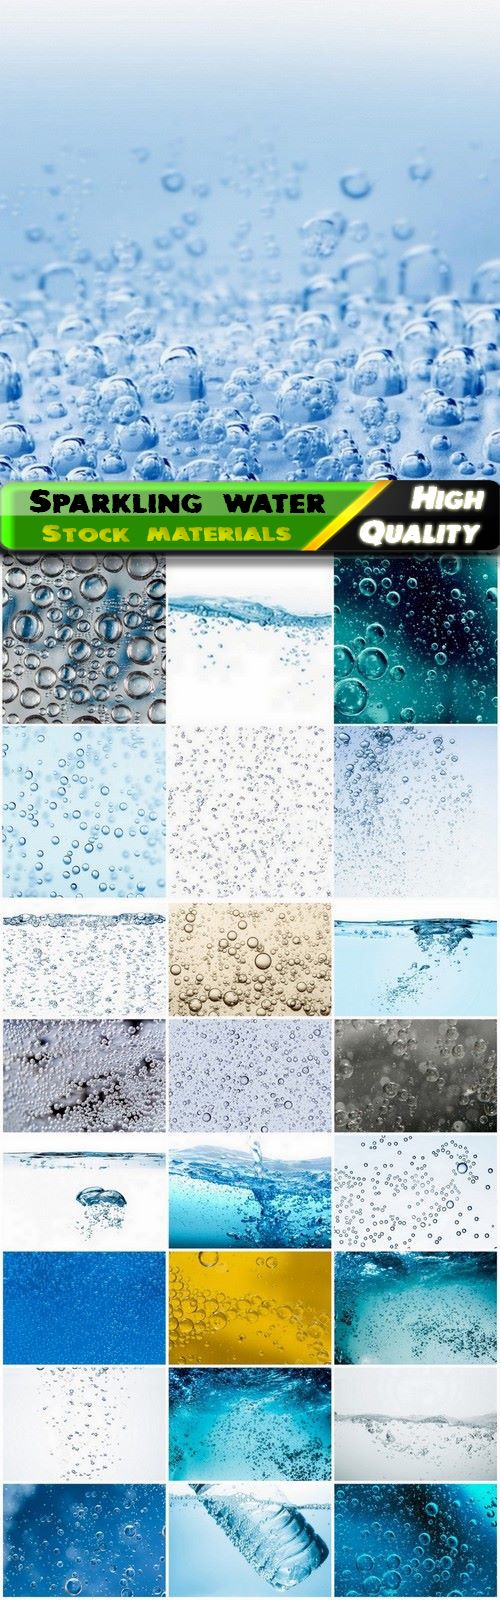 Clear fresh sparkling water with air bubbles 25 HQ Jpg